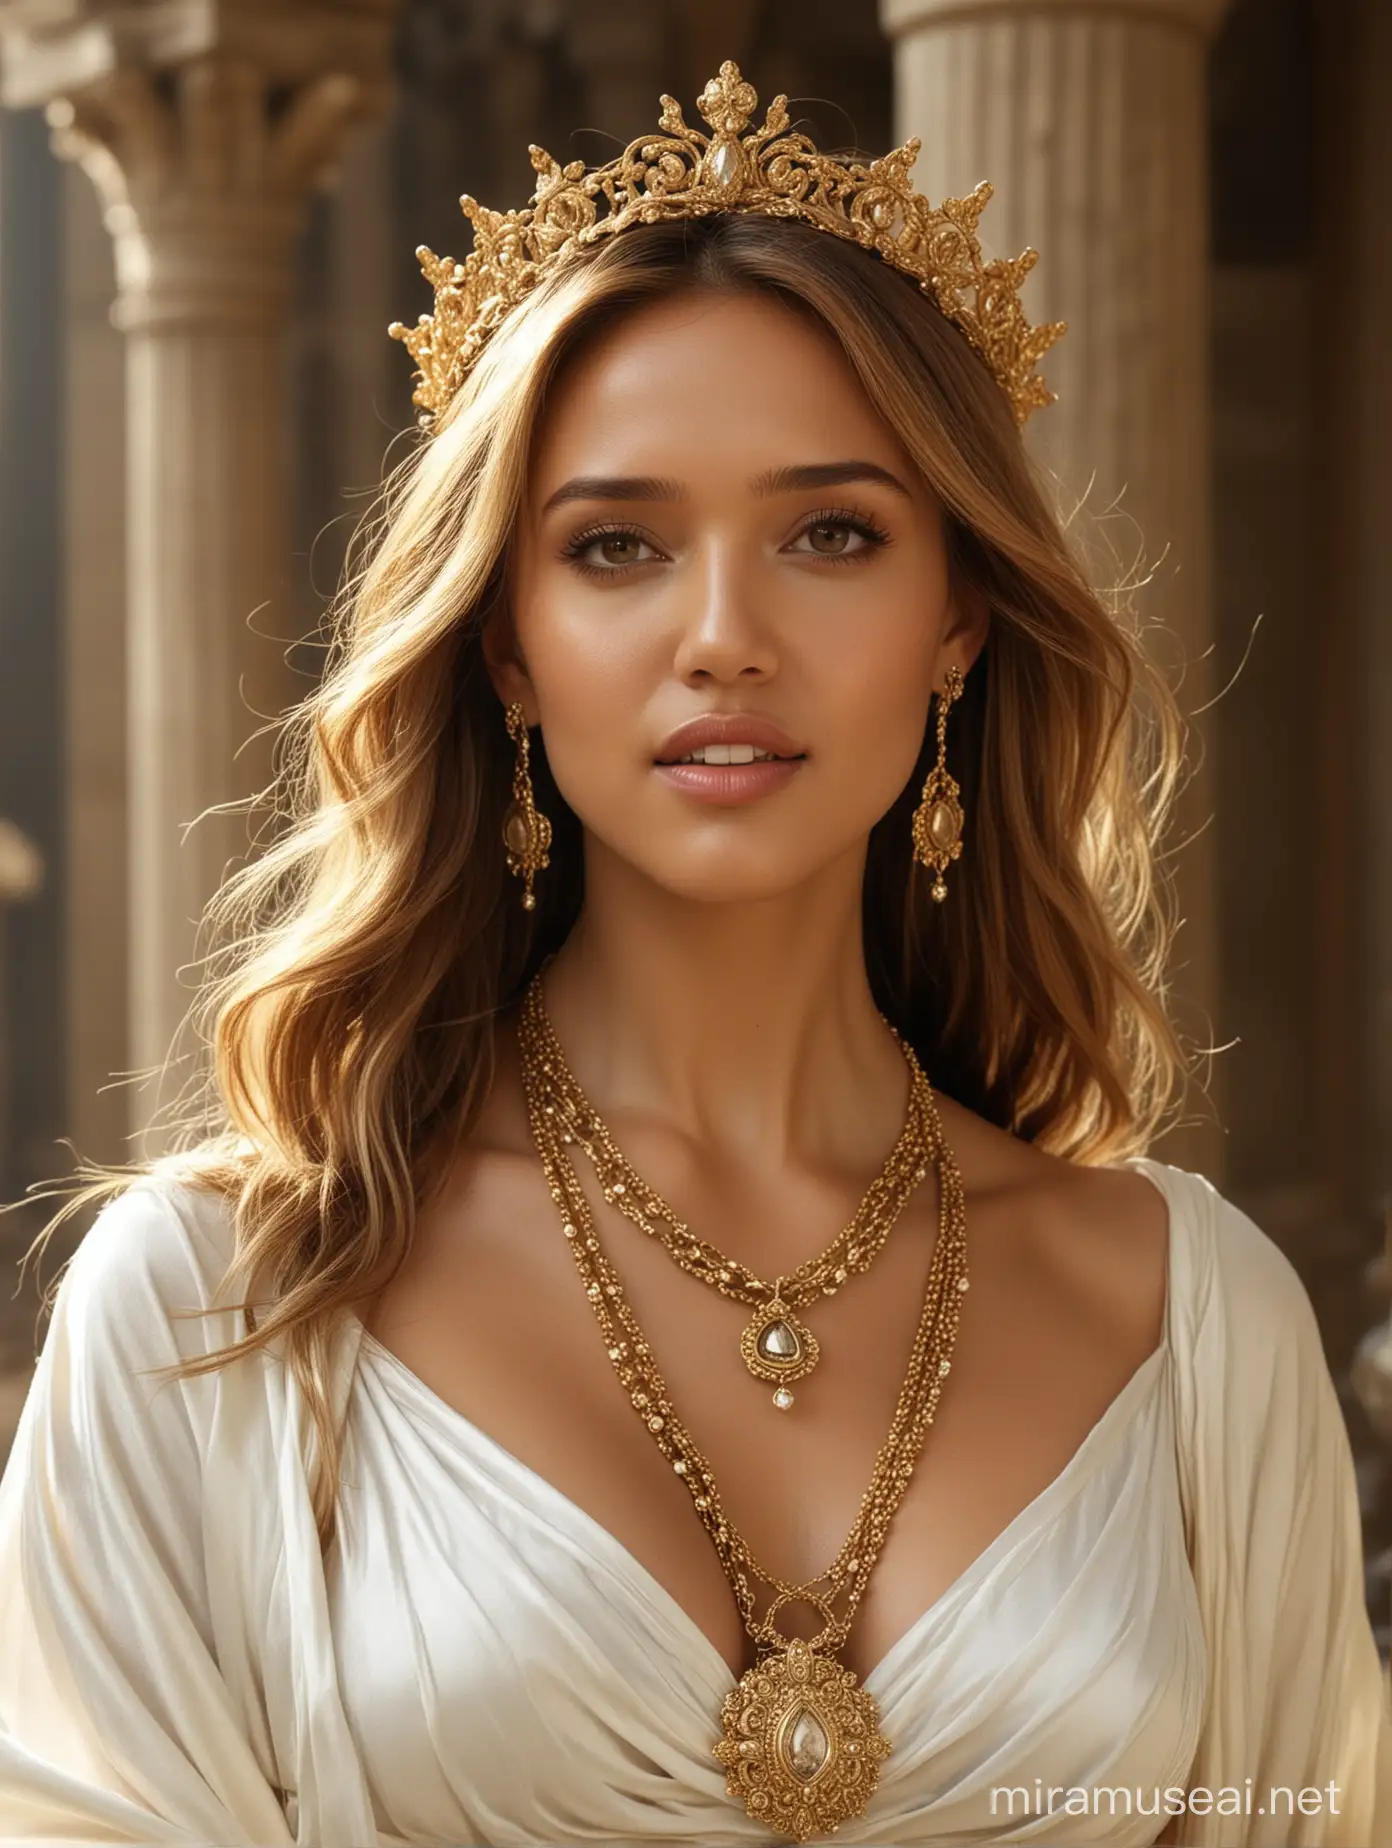 Jessica Alba as Freya Goddess of Love and Fertility in Temple Portrait